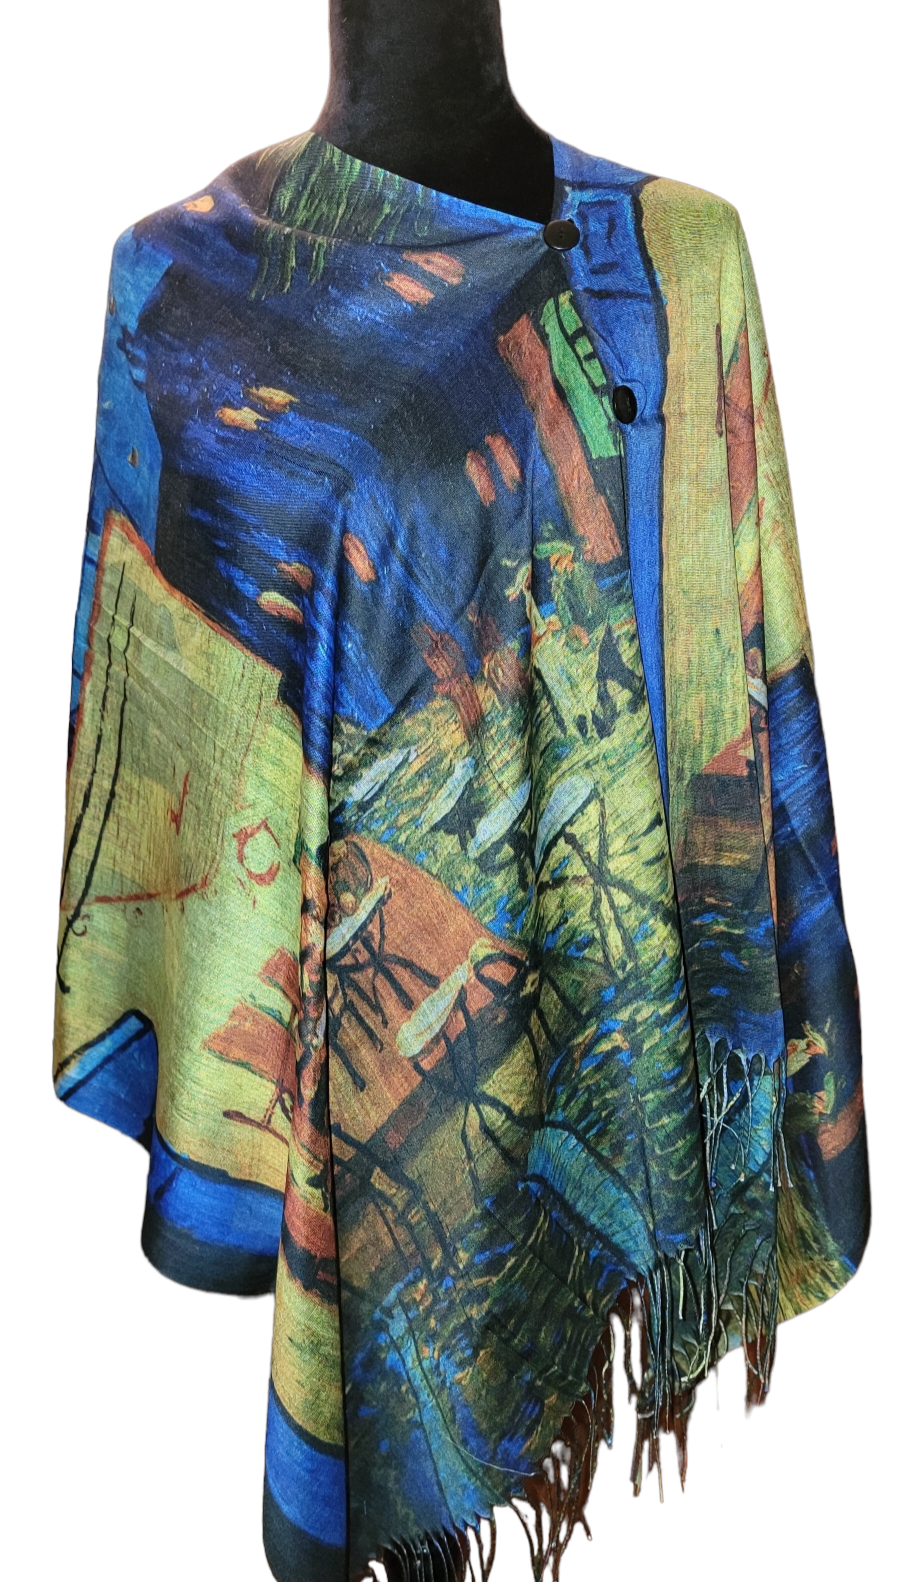 Wrap Yourself in Art: Vibrant Print Shawls Inspired by Fine Art - 22